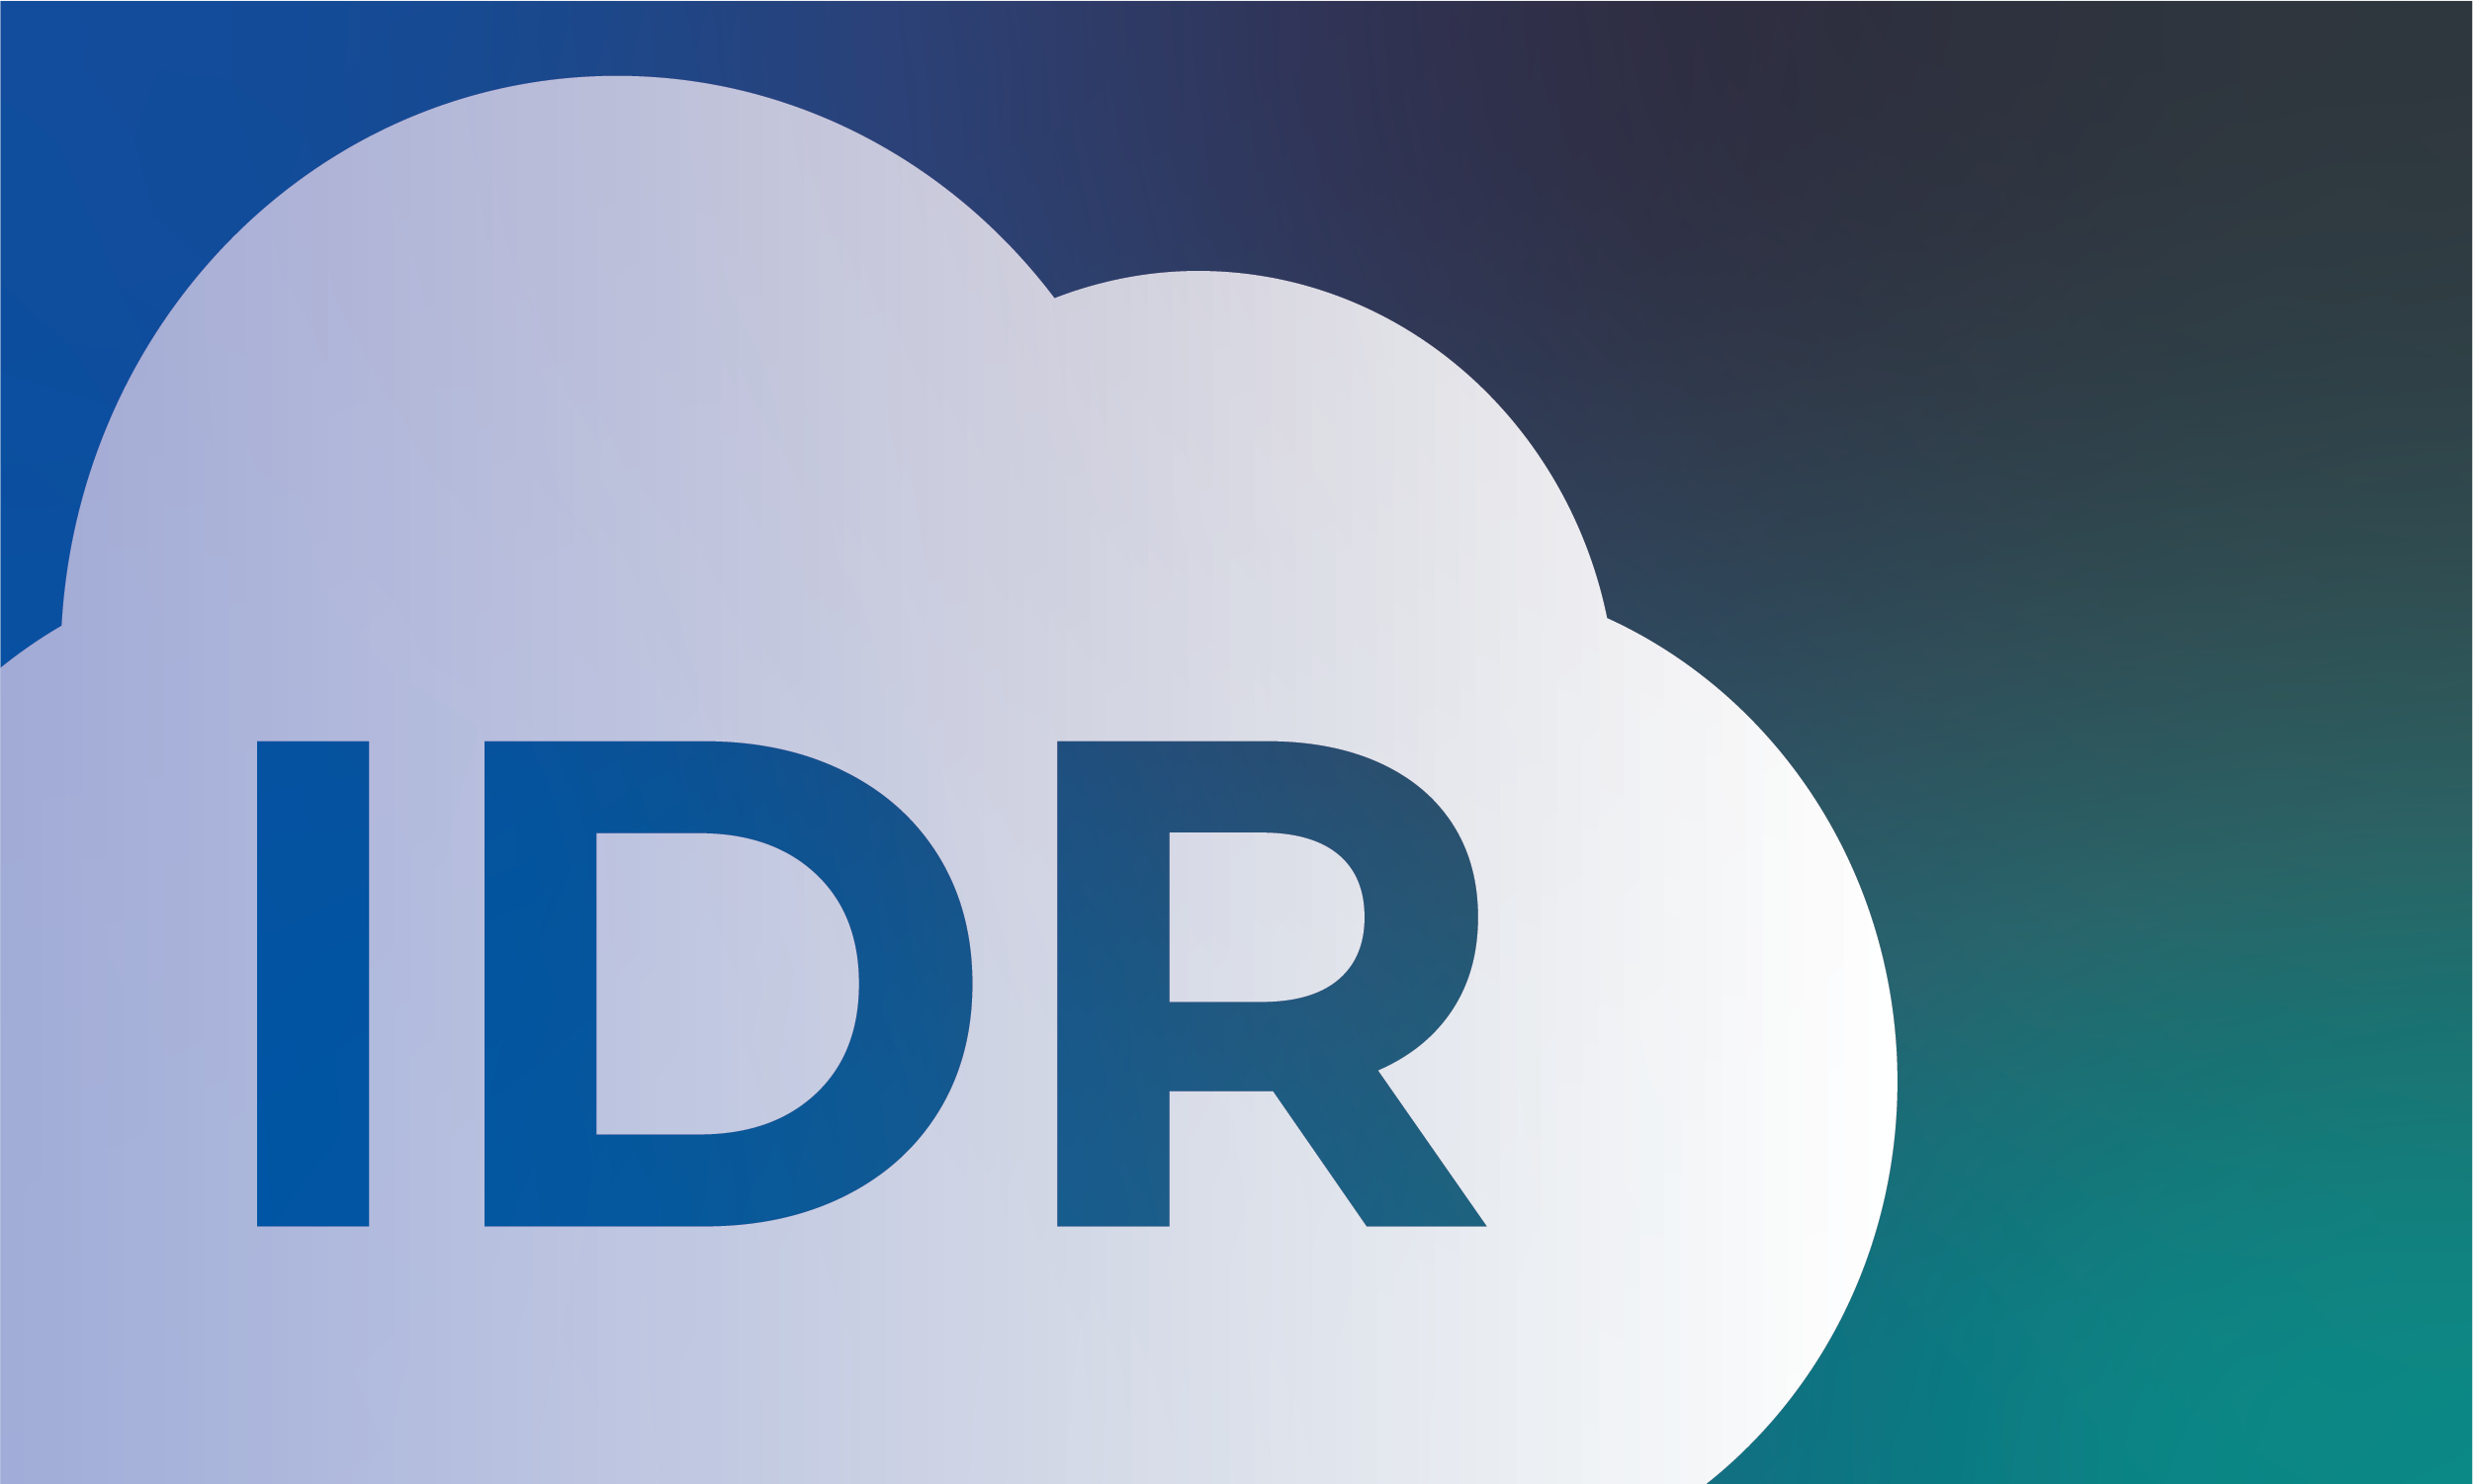 Graphic of cloud against gradient blue background with the acronym "IDR" in the cloud